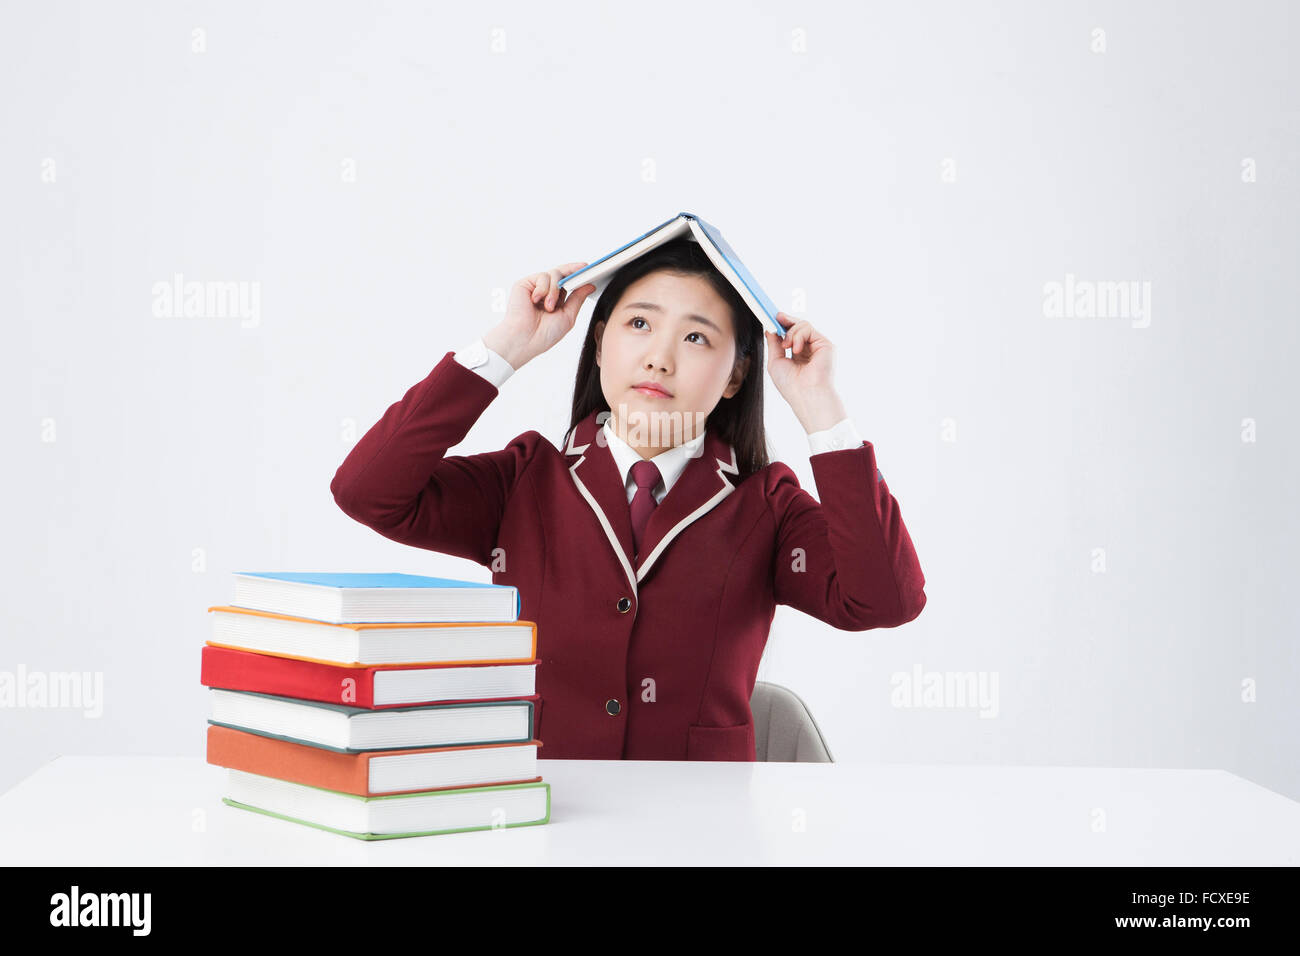 High school girl seated at desk with a pile of books holding an open book on her head and looking up in worried face Stock Photo